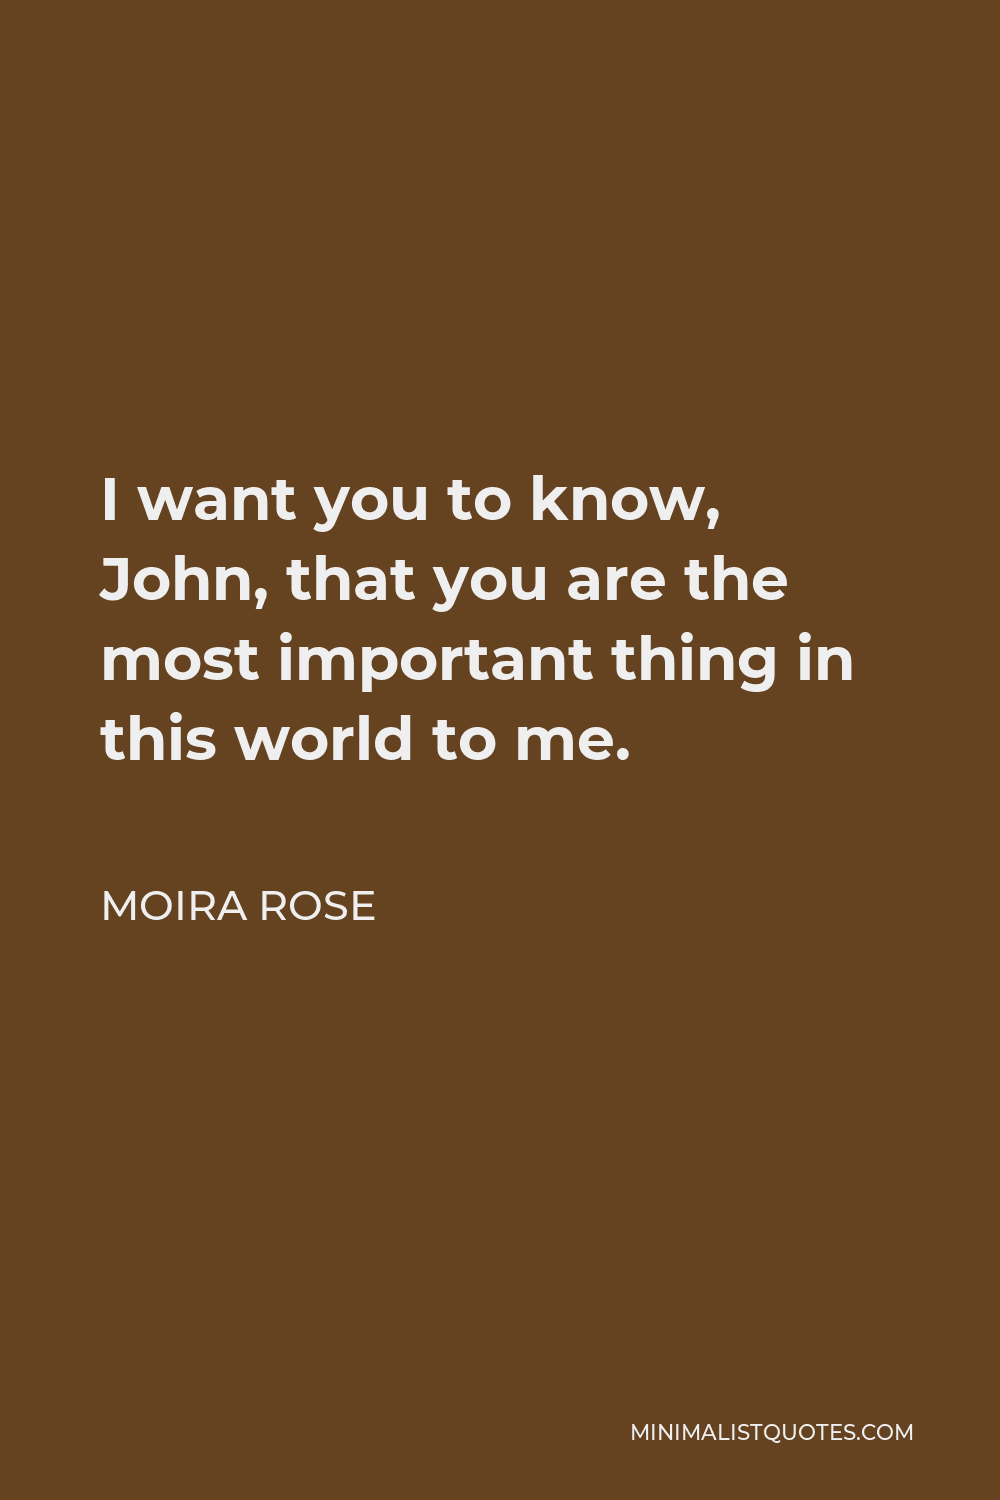 Moira Rose Quote - I want you to know, John, that you are the most important thing in this world to me.